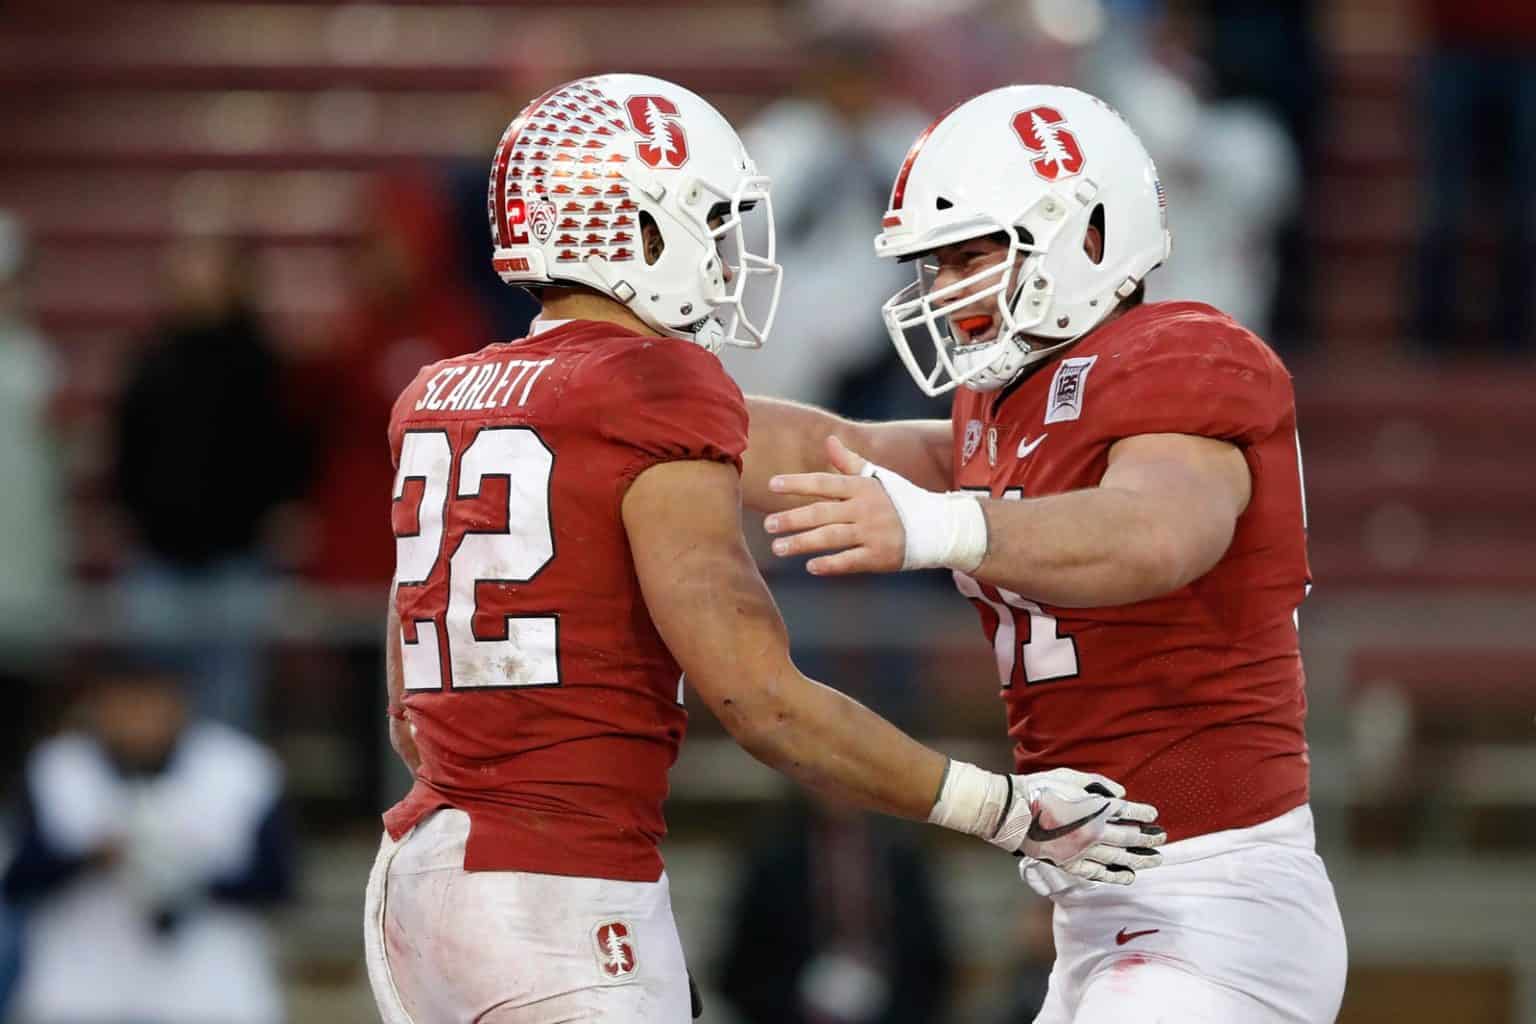 2020 Stanford Cardinal football schedule released